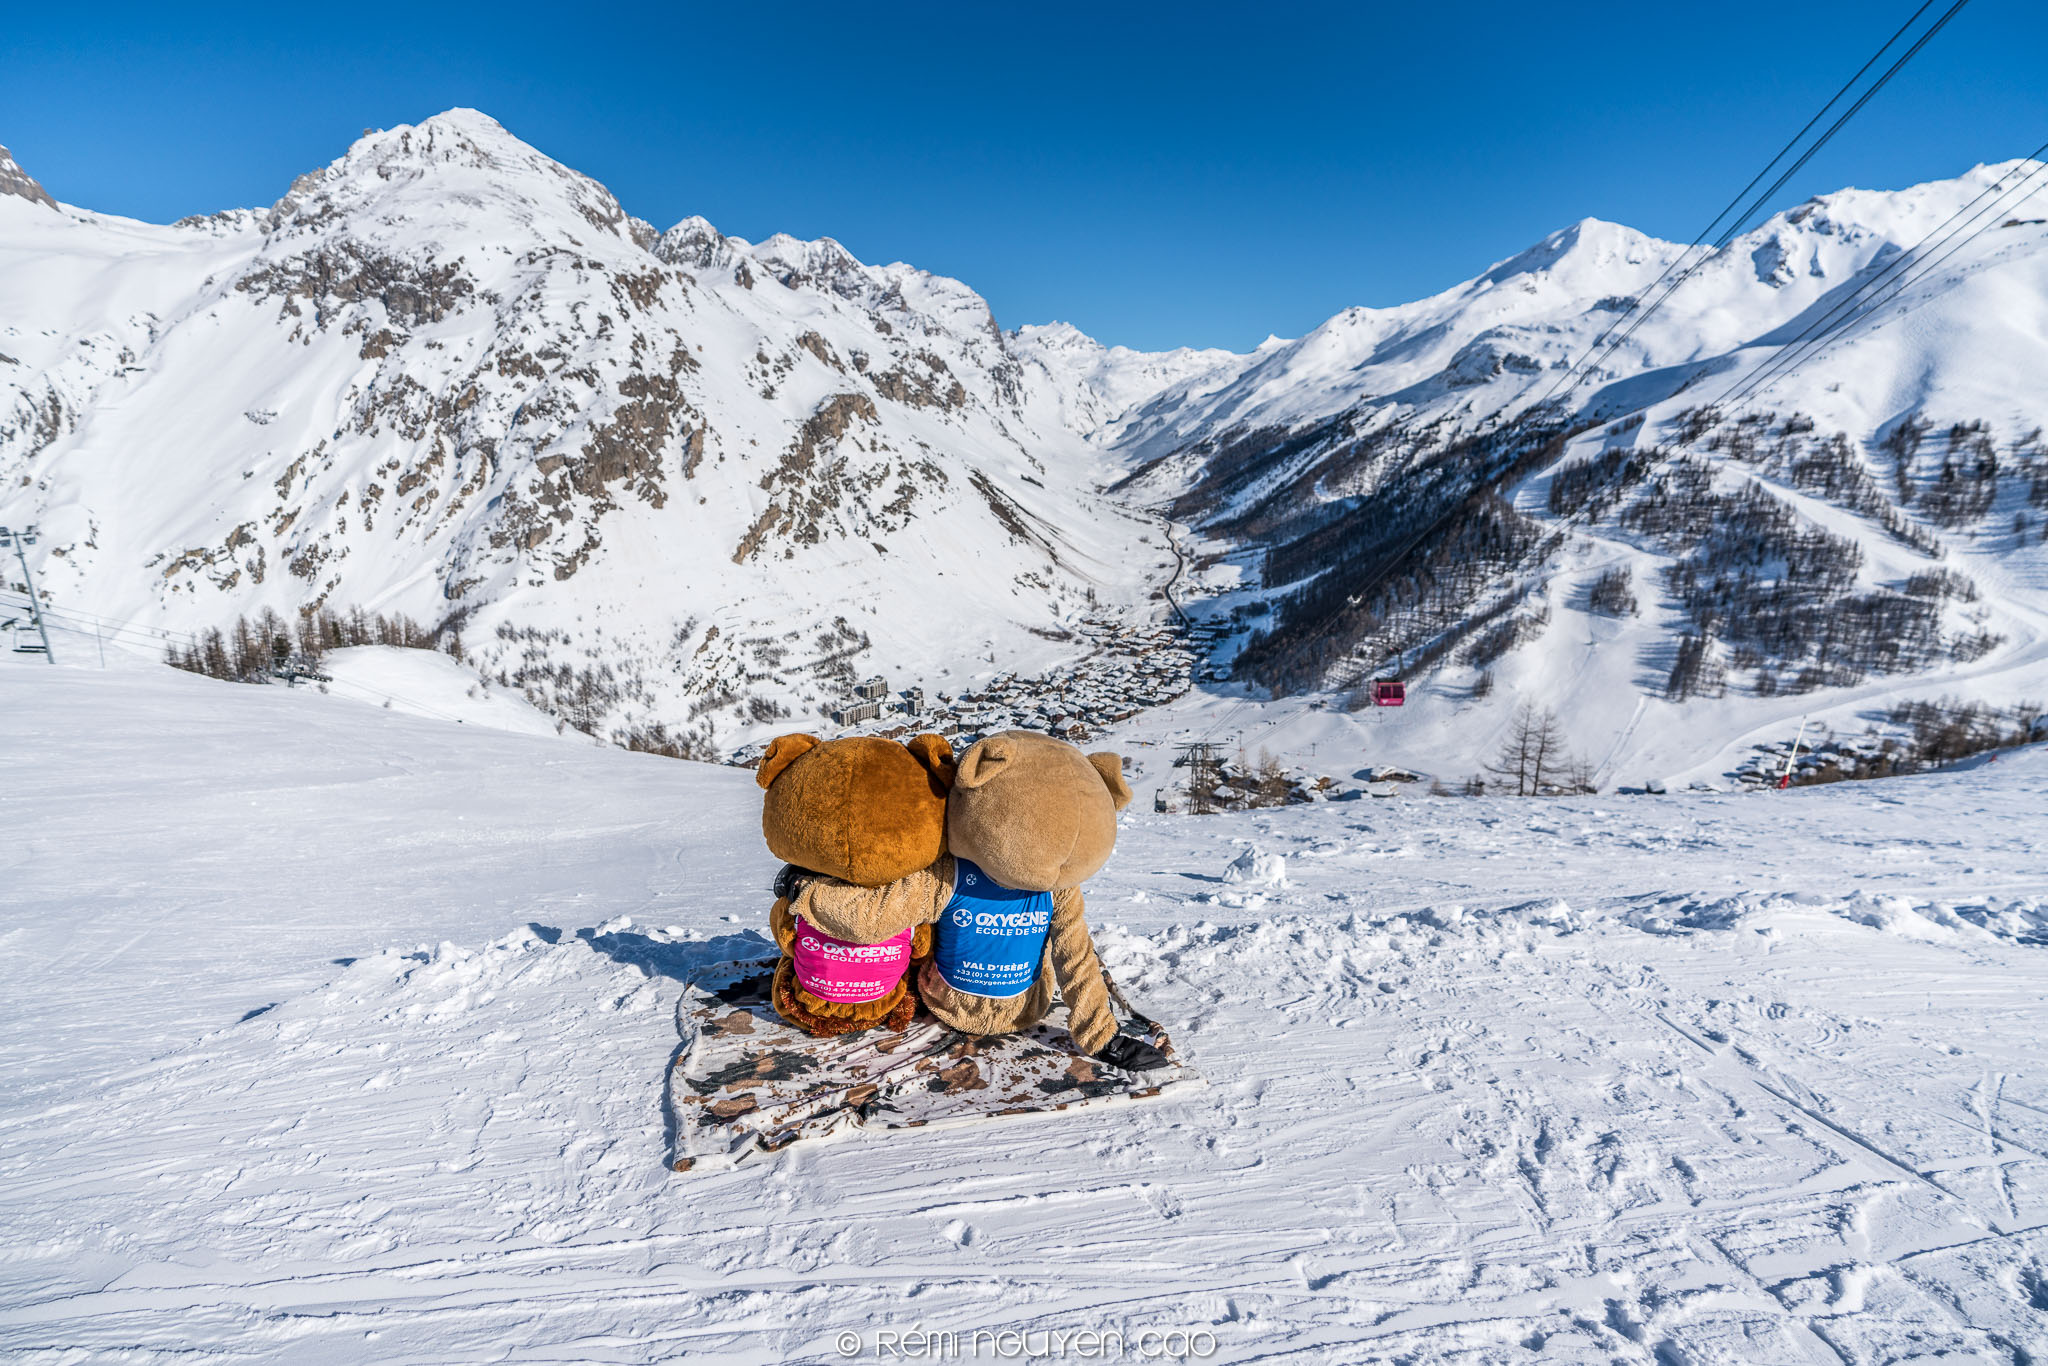 Love is on the slopes with Oxygene!